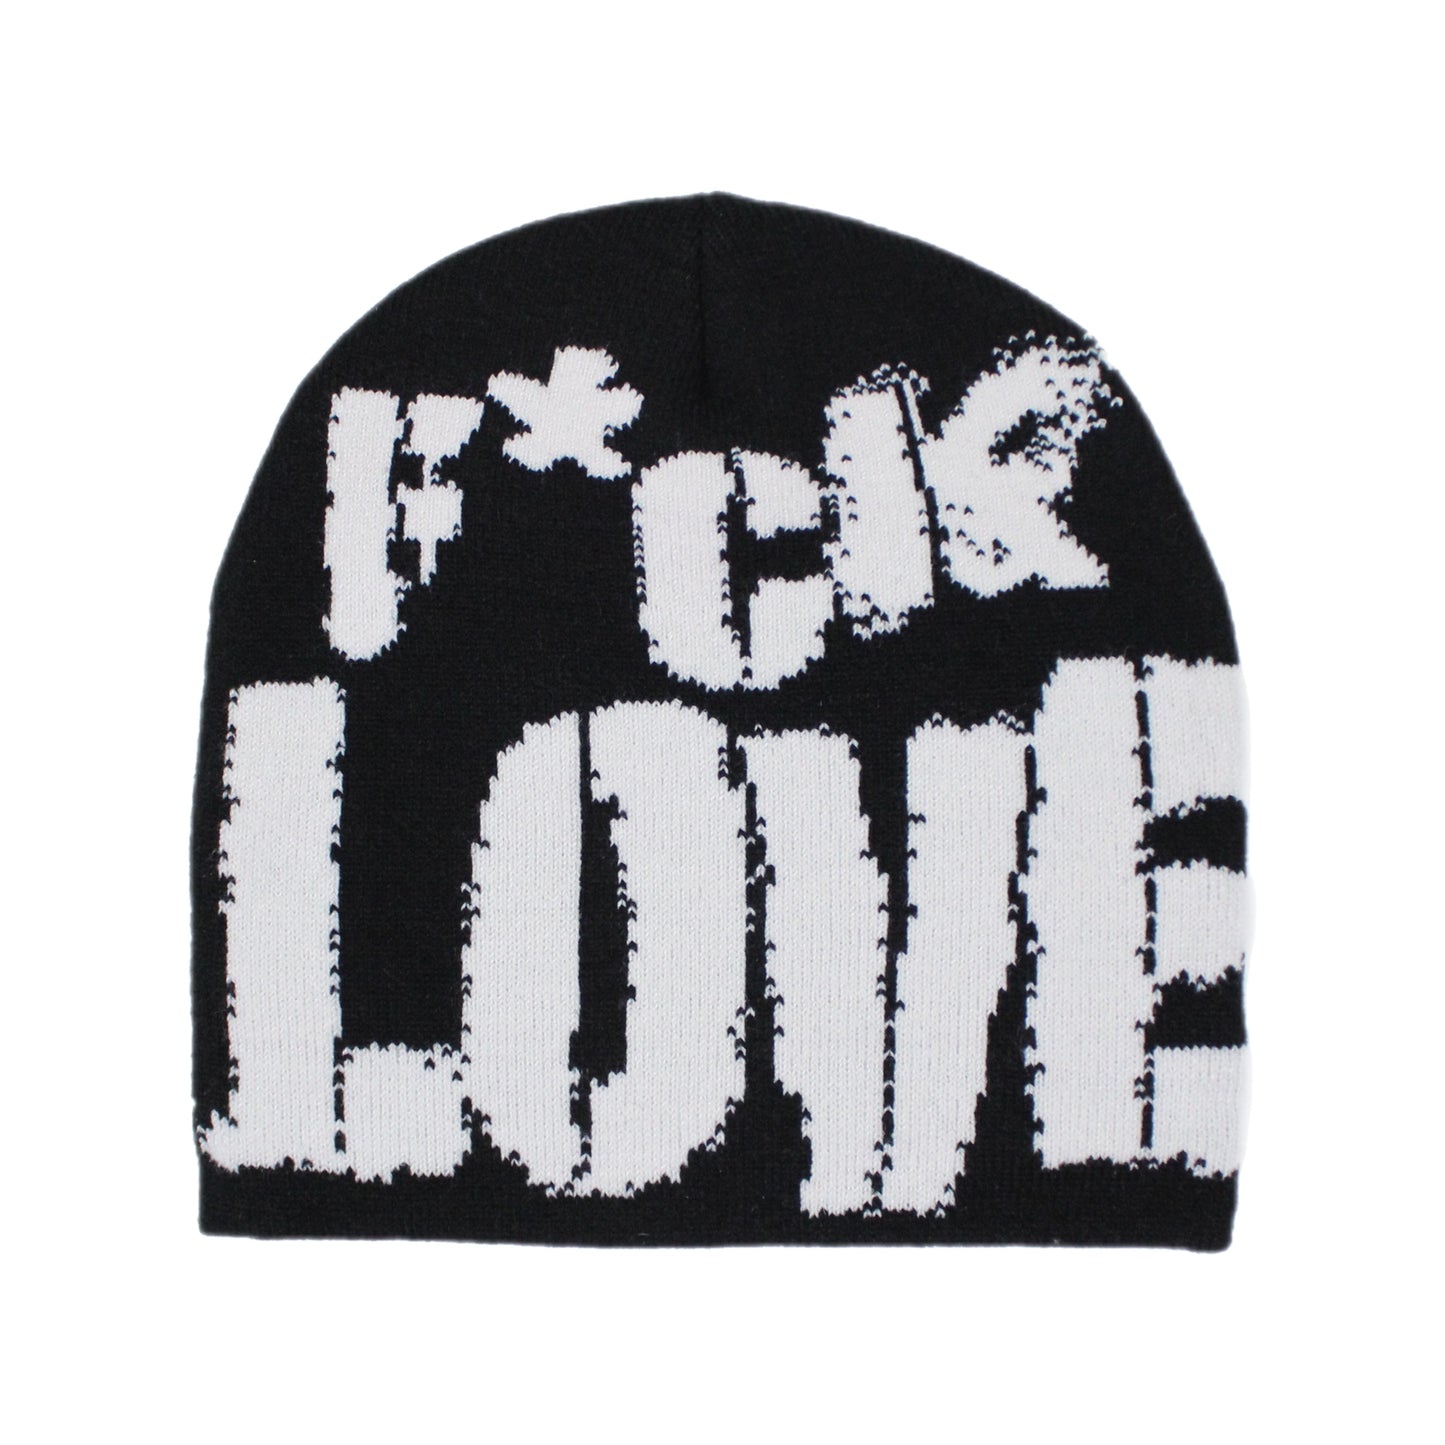 EVOL Love Is for Lames Beanie Black And White